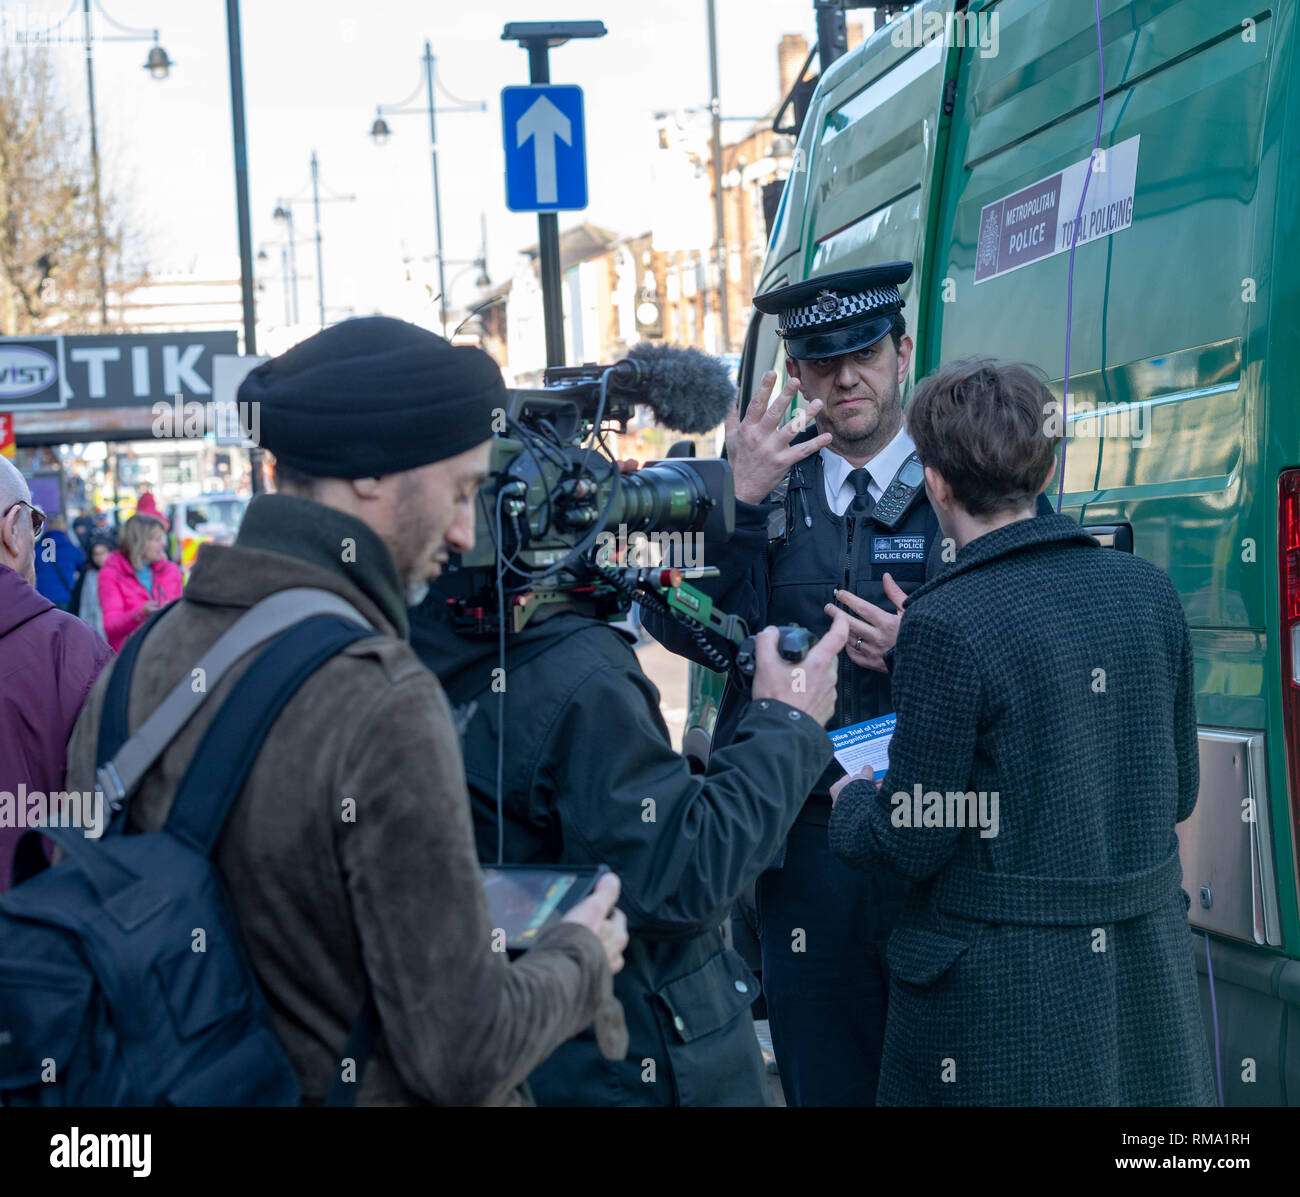 Romford London 14th February 2019. The second of the Metropolitan Police trials, outside Romford railway station, of the controversial live face recognition technology has taken place. It attracted international media interest with camera crews from Al Jazeera, Japan and France, among others, covering the trial. The facial recognition cameras scan passing pedestrians and if any of them are on a police 'watch list' they will be stopped. The last trial at Romford resulted in five arrests. Credit: Ian Davidson/Alamy Live News Stock Photo